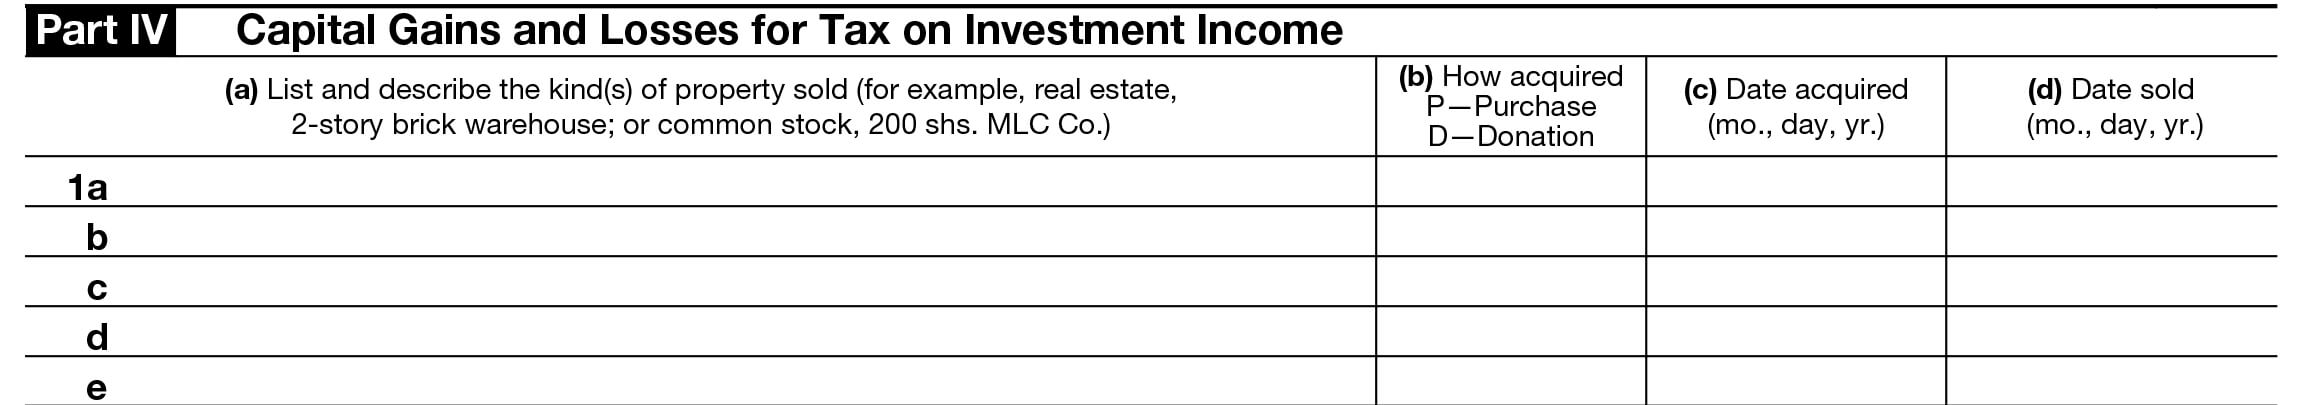 Part IV - Capital Gains and Losses for Tax on Investment Income